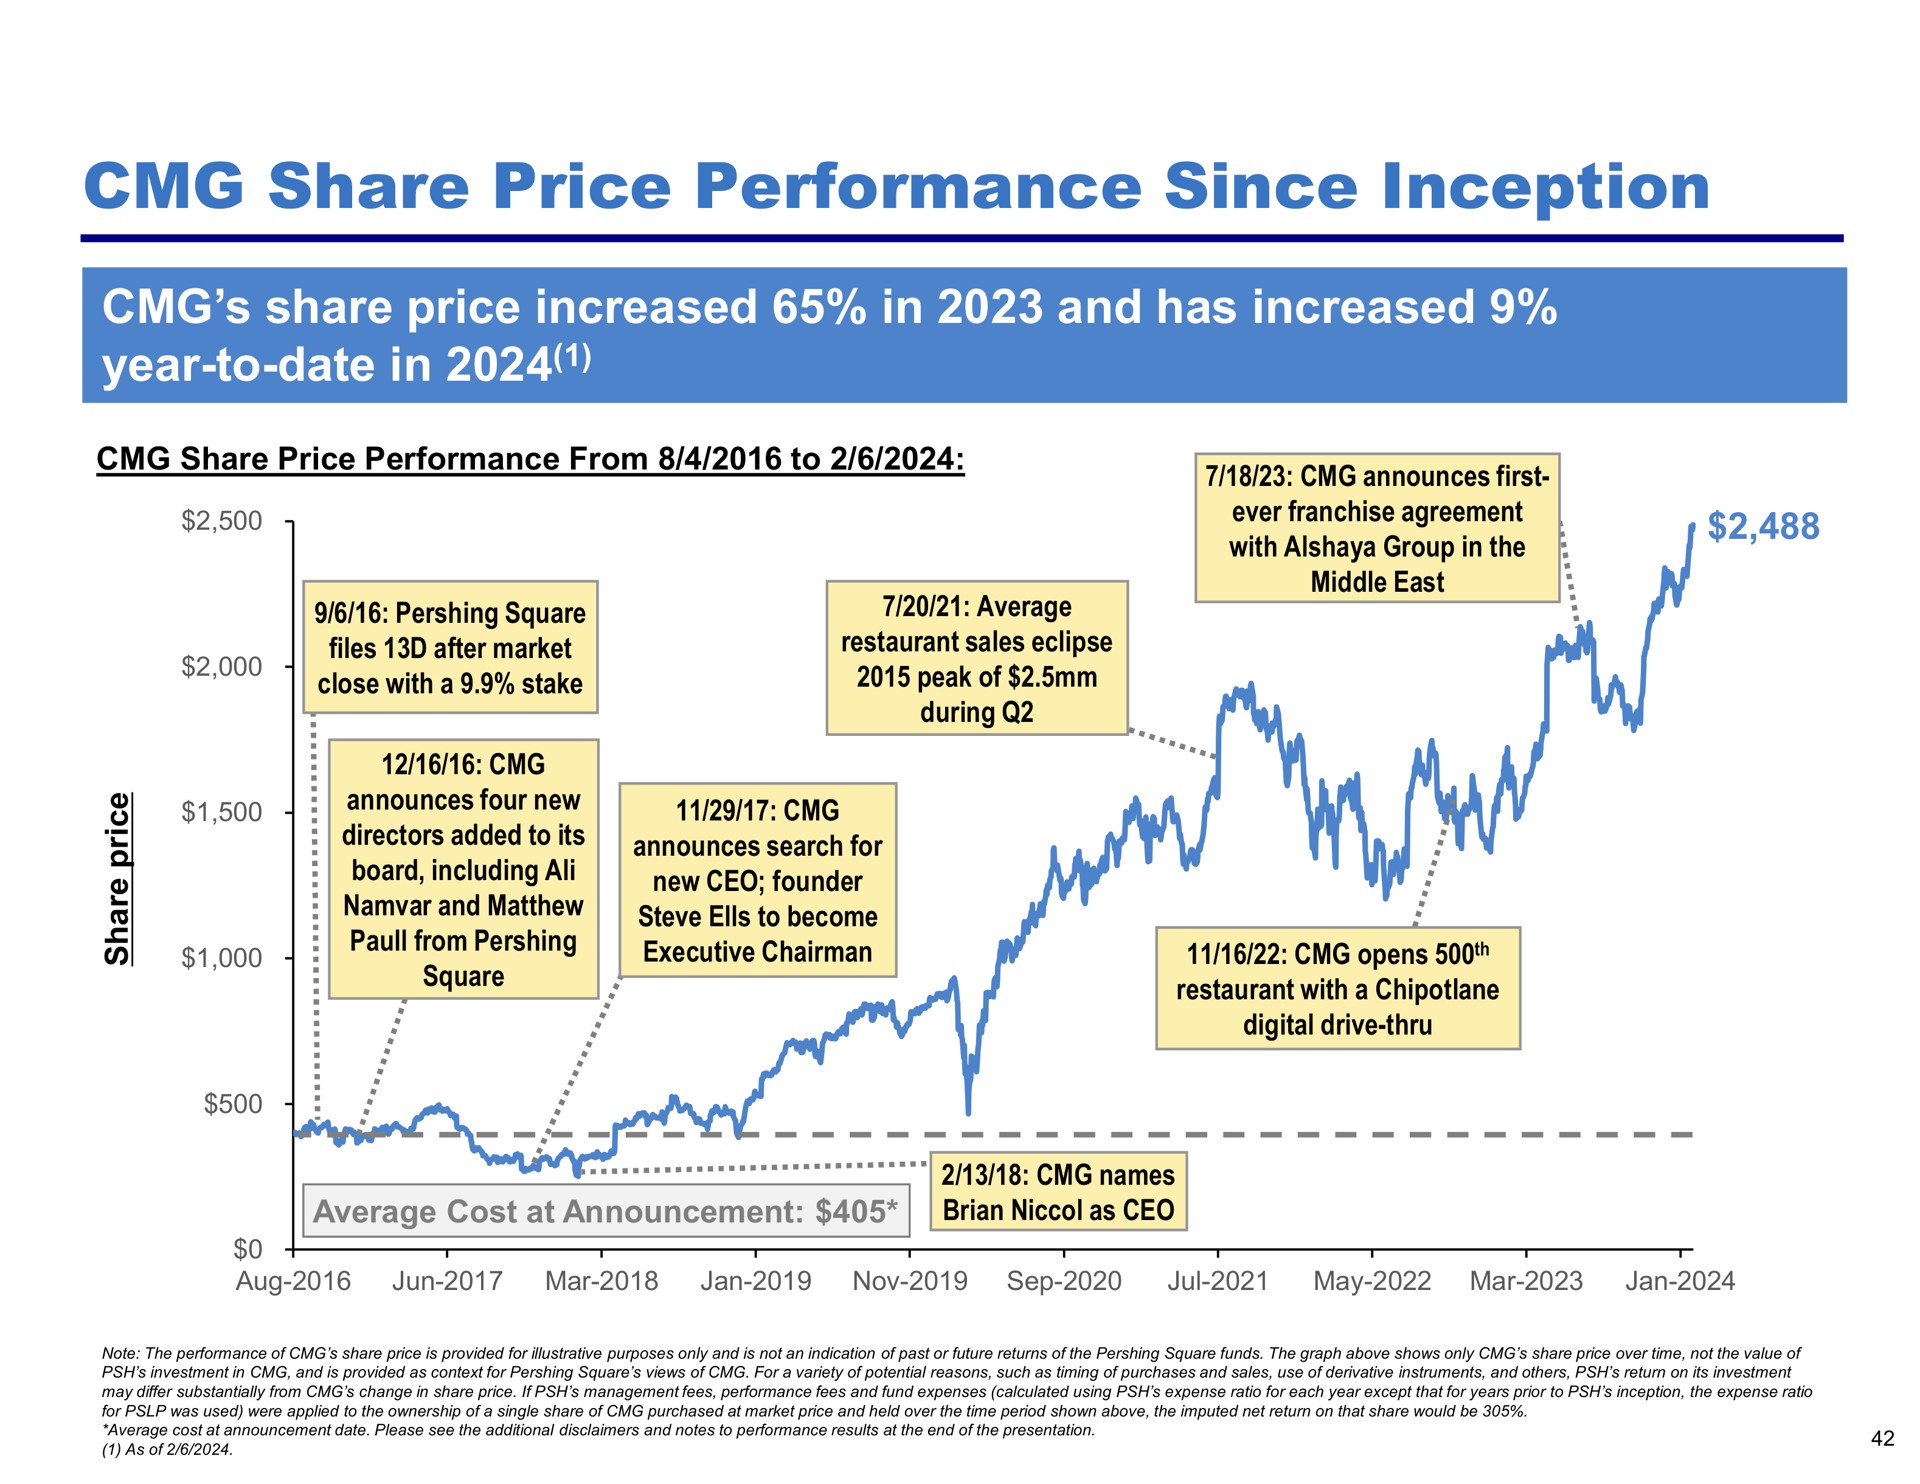 share price performance since inception share price increased in and has increased year to date in executive chairman opens | Pershing Square